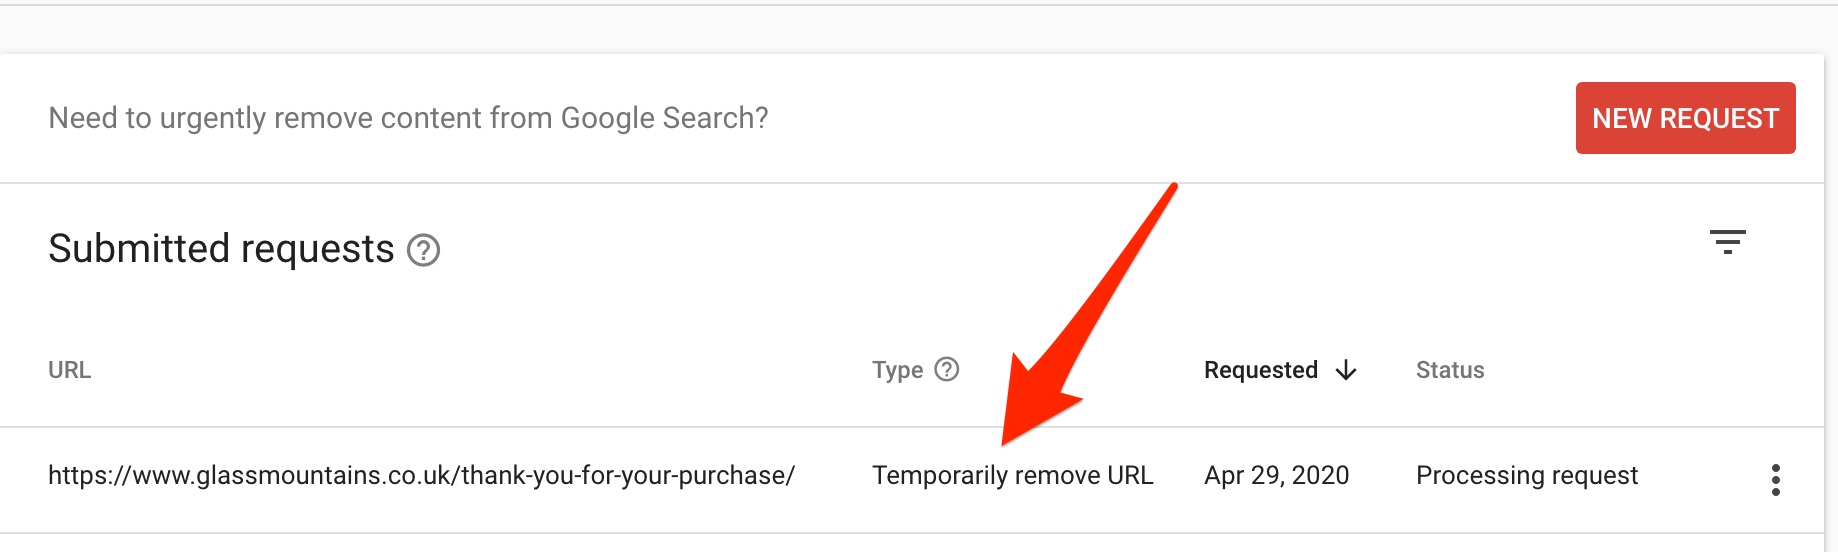 Google Search Console now shows your URL removal request 